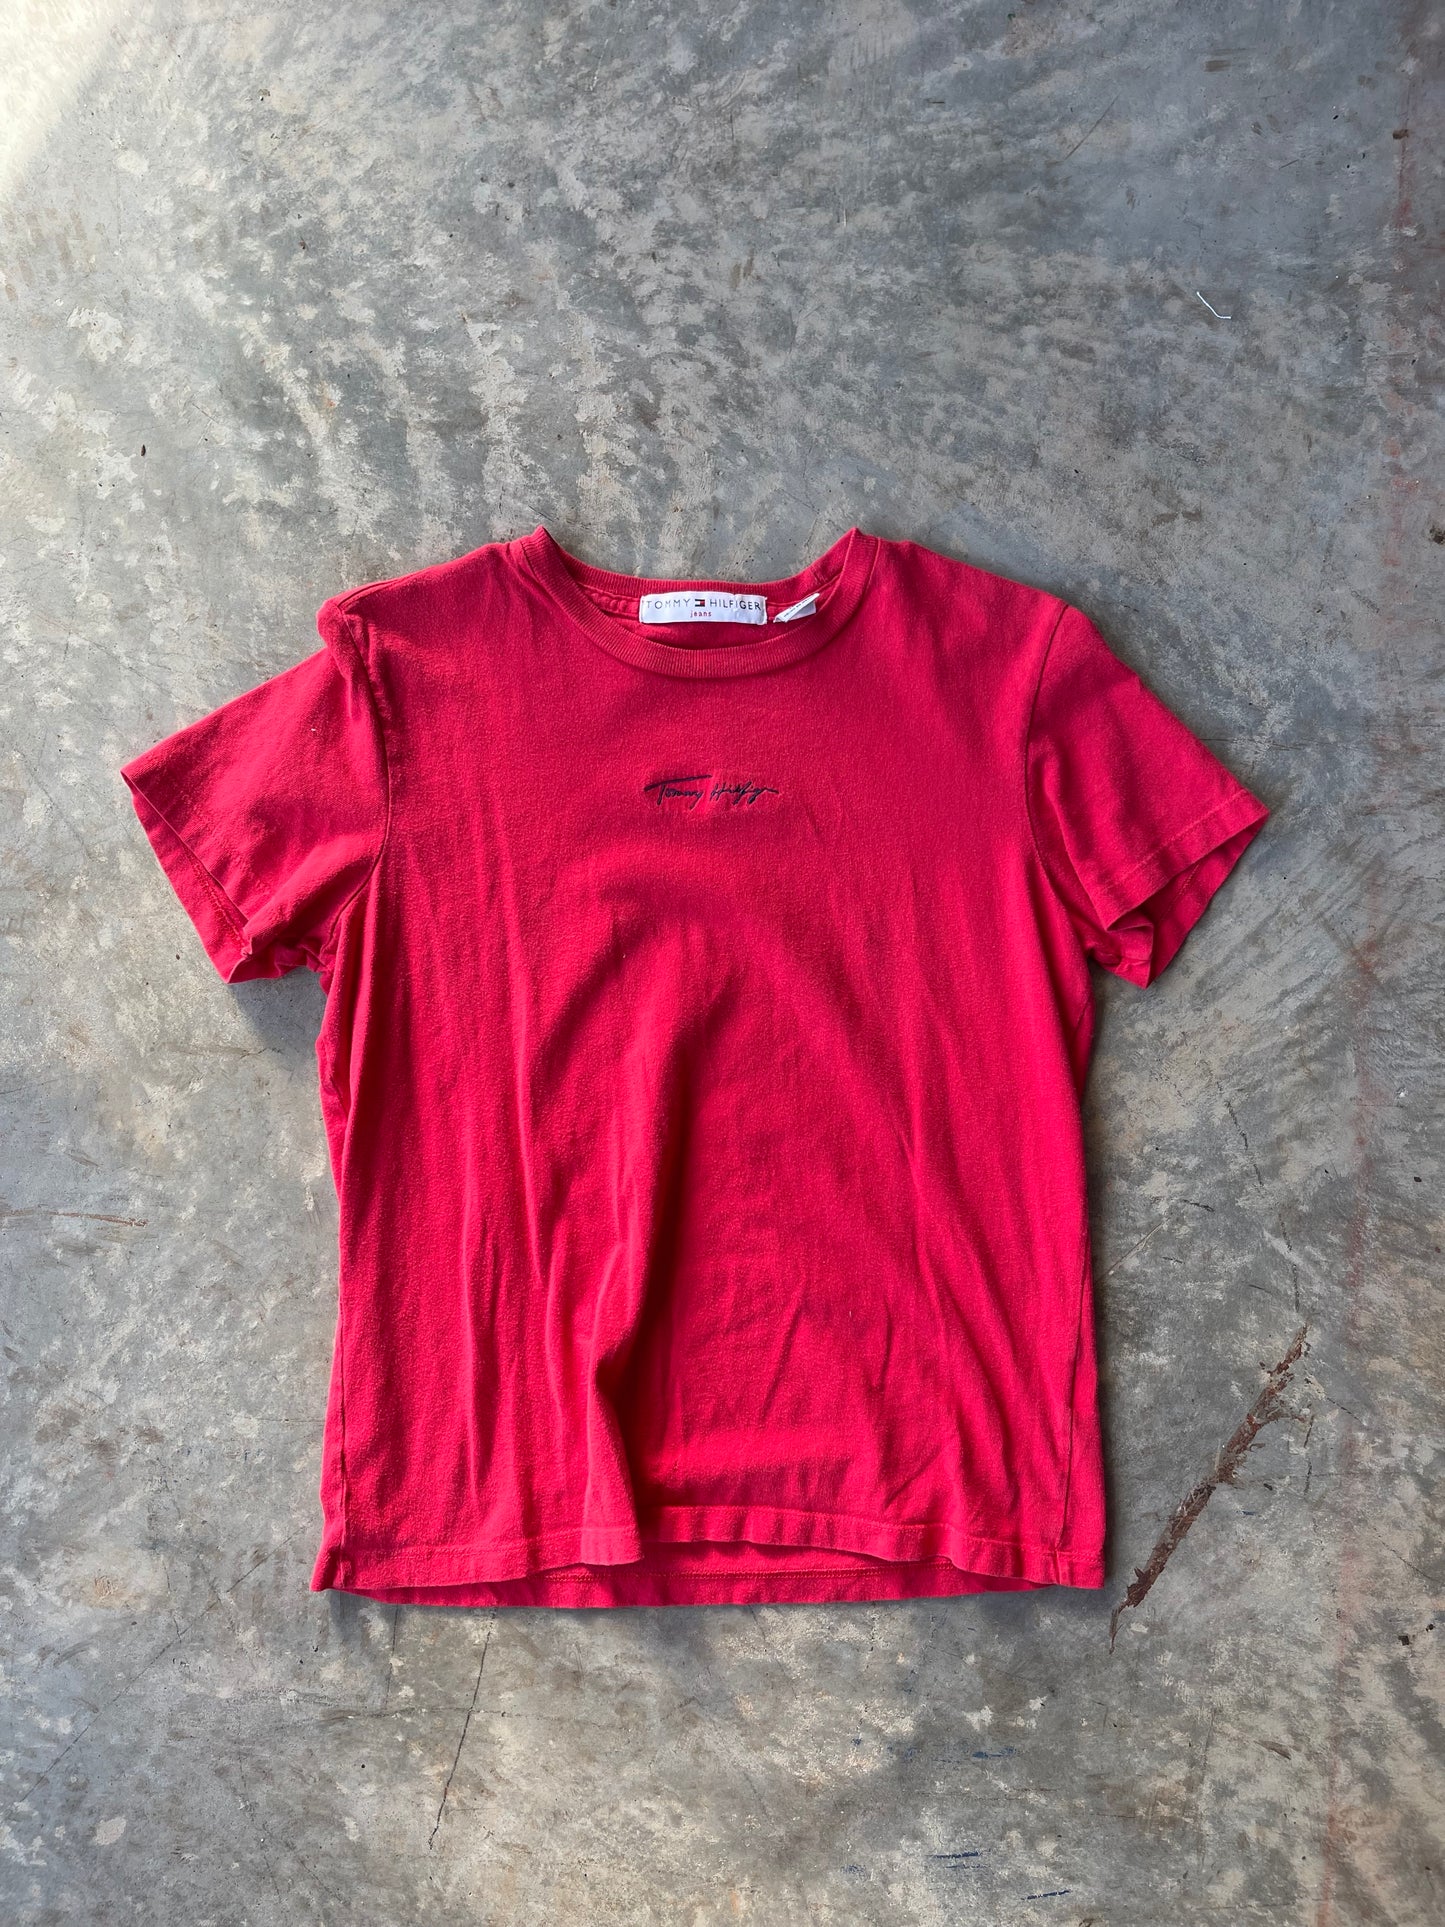 Tommy Hilfiger Red Baby Tee